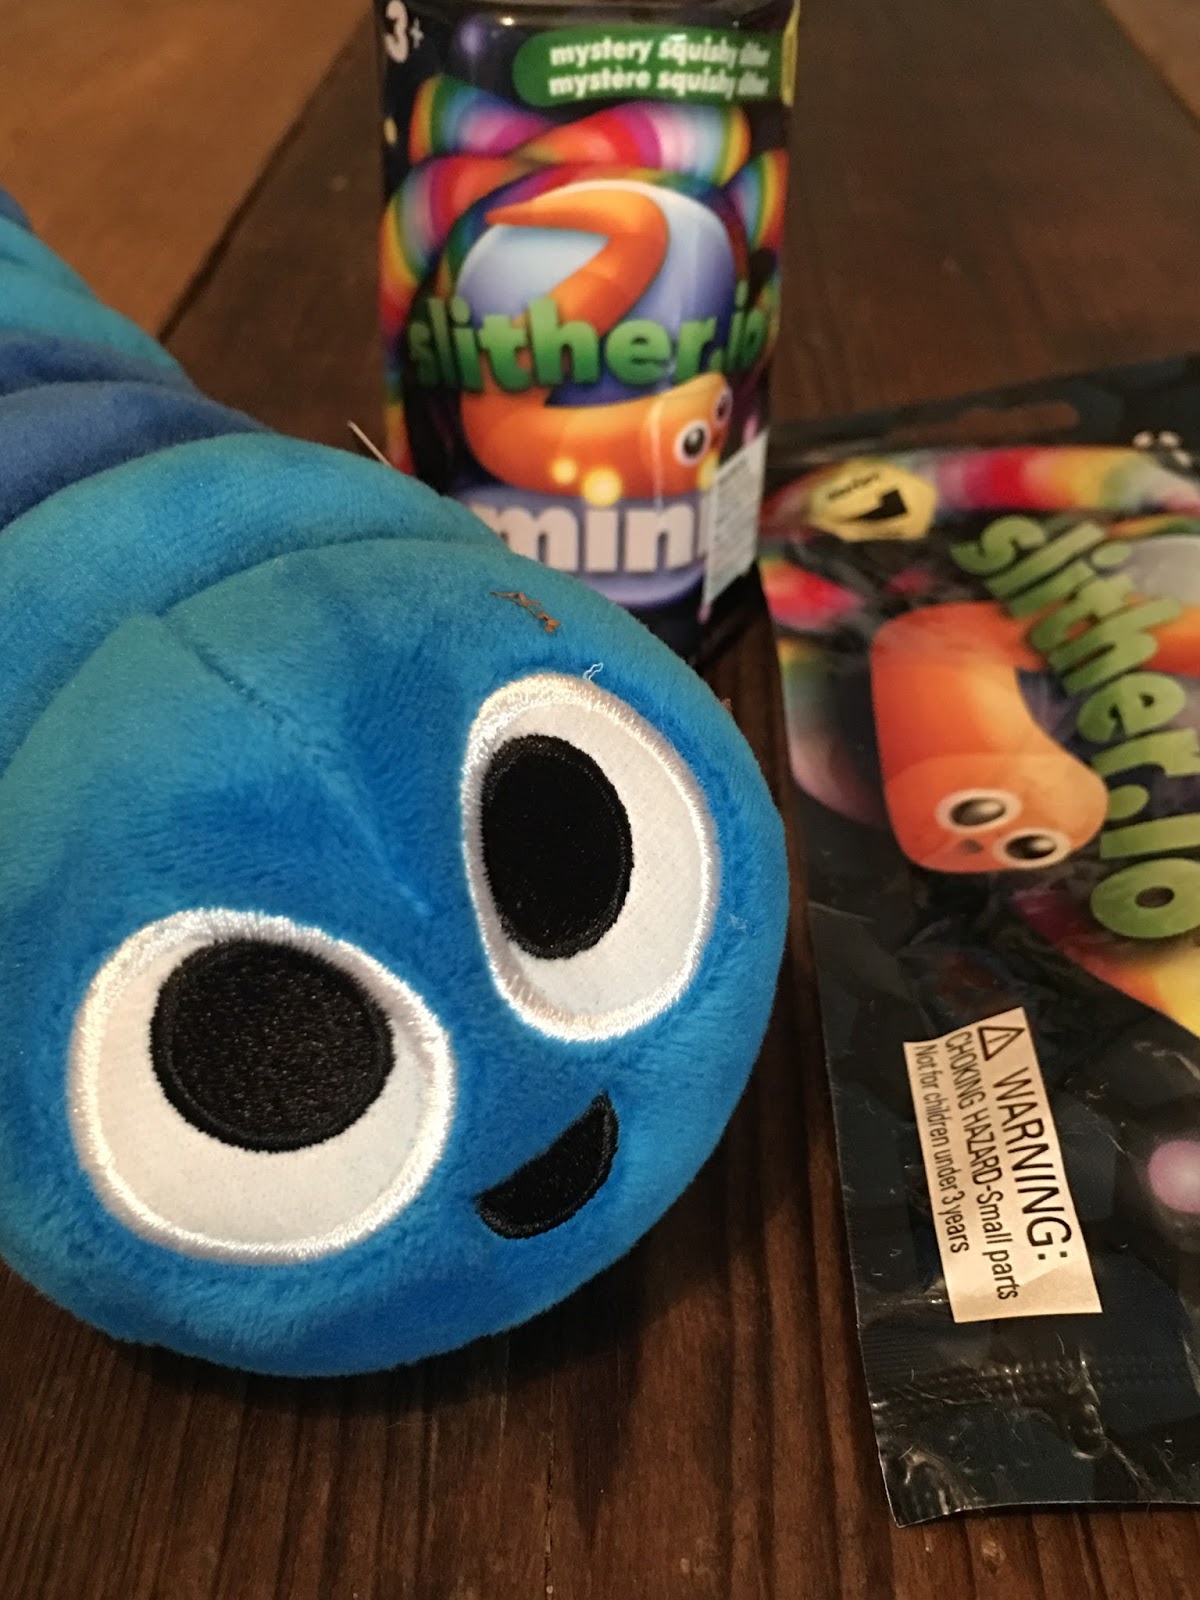 Slither-io -Gaming Guide For Parents & Review Of The New Toy Range.